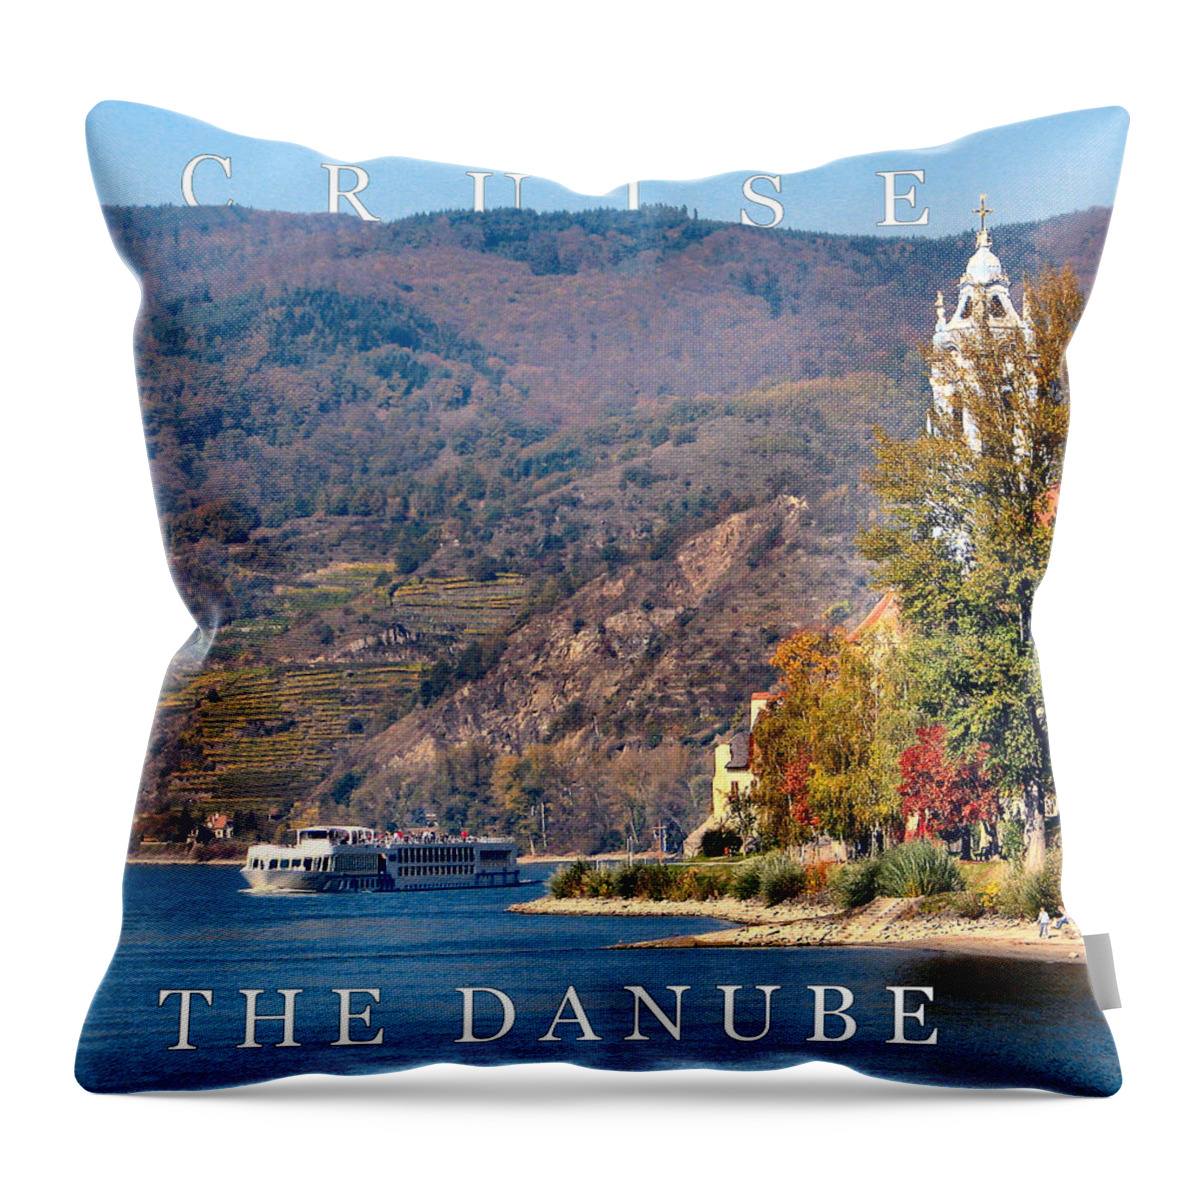 Europe Throw Pillow featuring the photograph Cruise The Danube by Lin Grosvenor